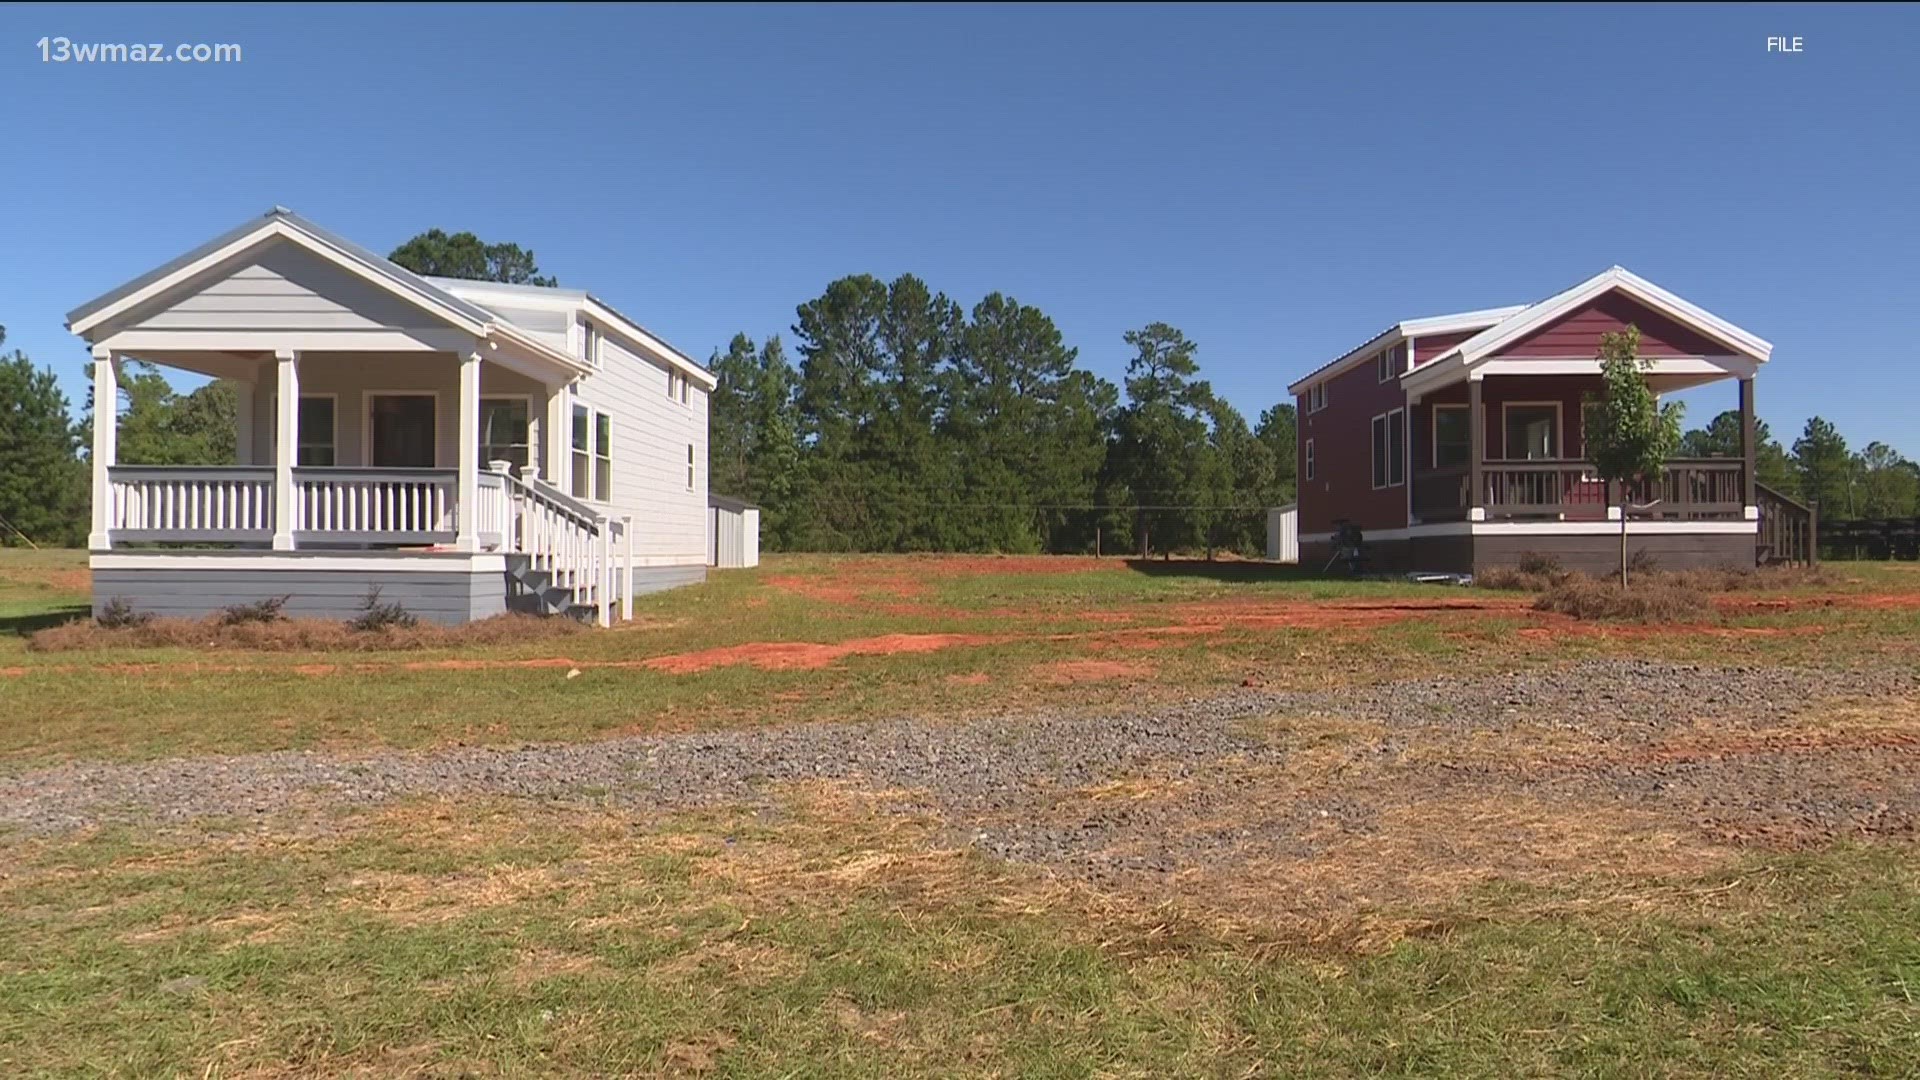 In Macon-Bibb County, the average hourly wage necessary to afford a 2-bedroom house is $16.27.